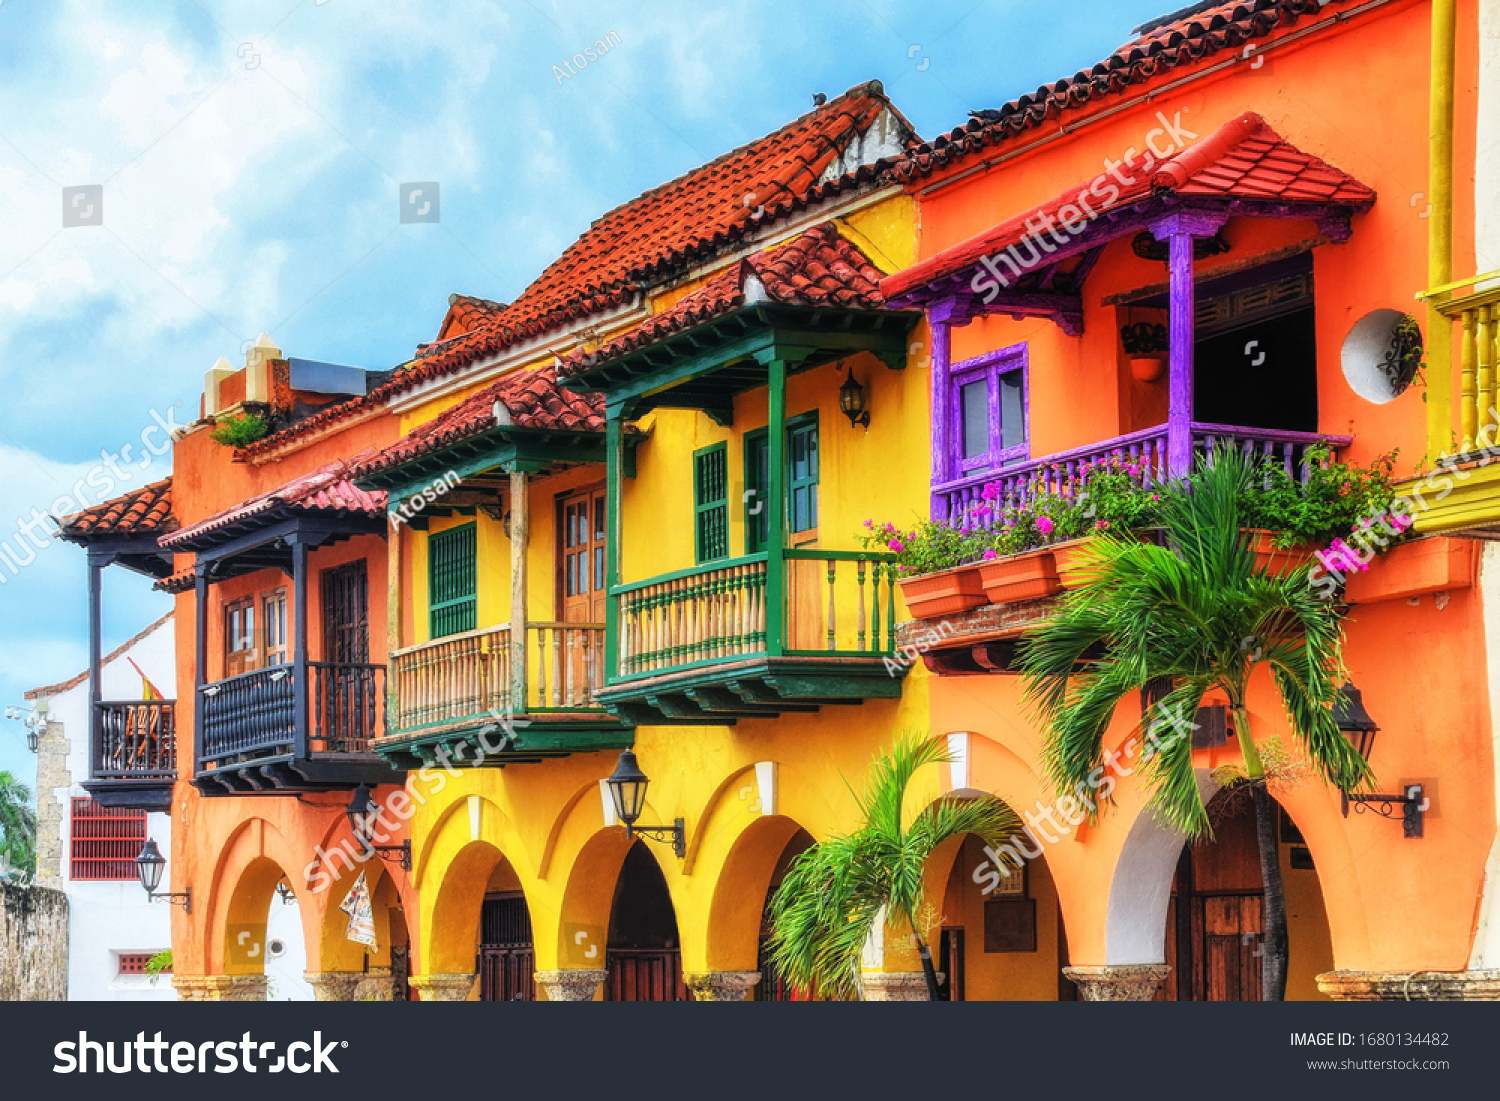 Colorful spanish colonial buildings with wooden balconies at Plaza de los Coches inside the walled city of Cartagena de Indias, Colombia. UNESCO world heritage site. #1680134482